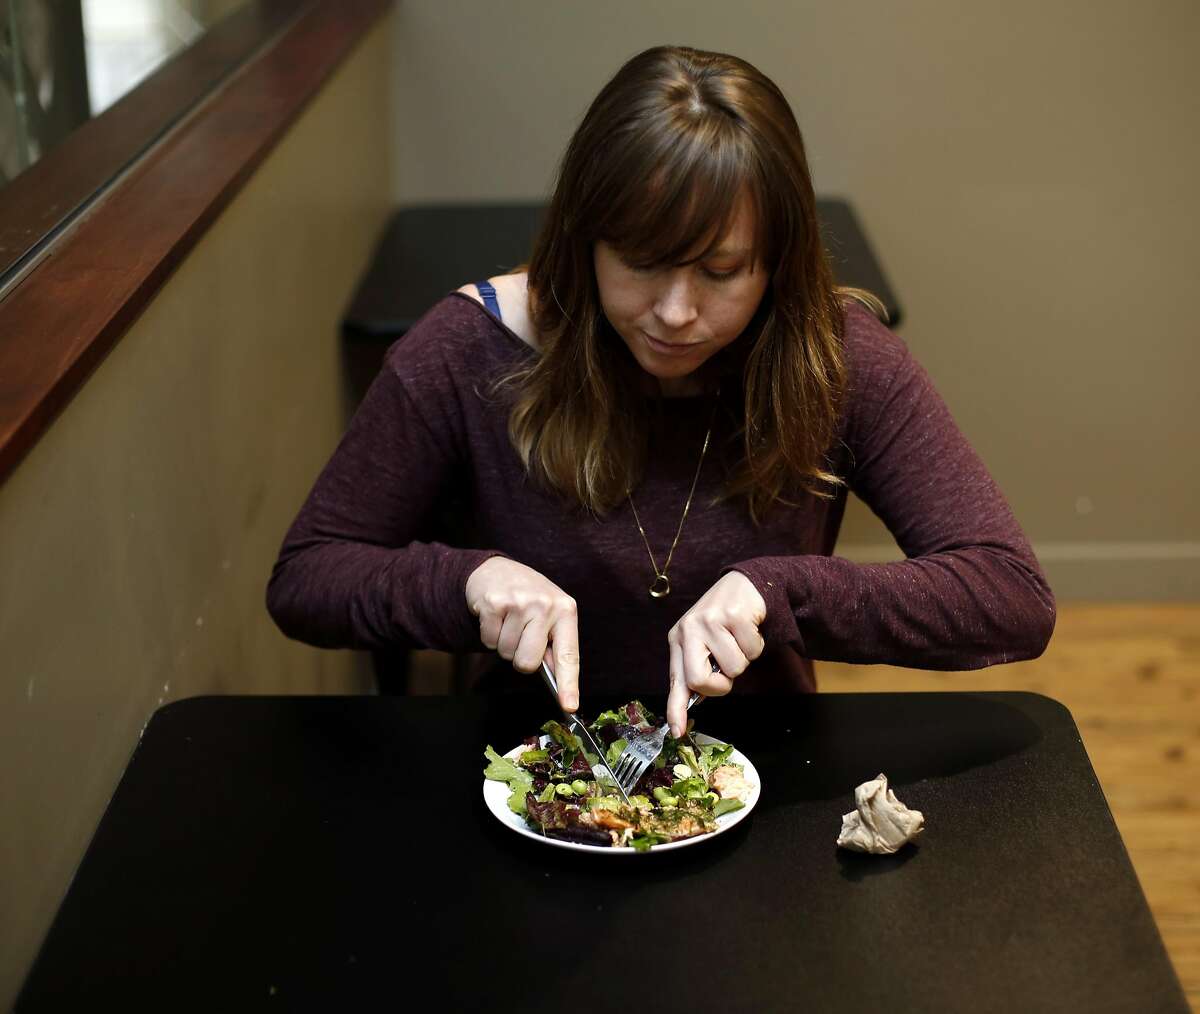 Ashley McCormack of Environmental Working Group eats a salad with salmon at a restaurant down the street from her office in Oakland, California, on Tuesday, March 15, 2016.